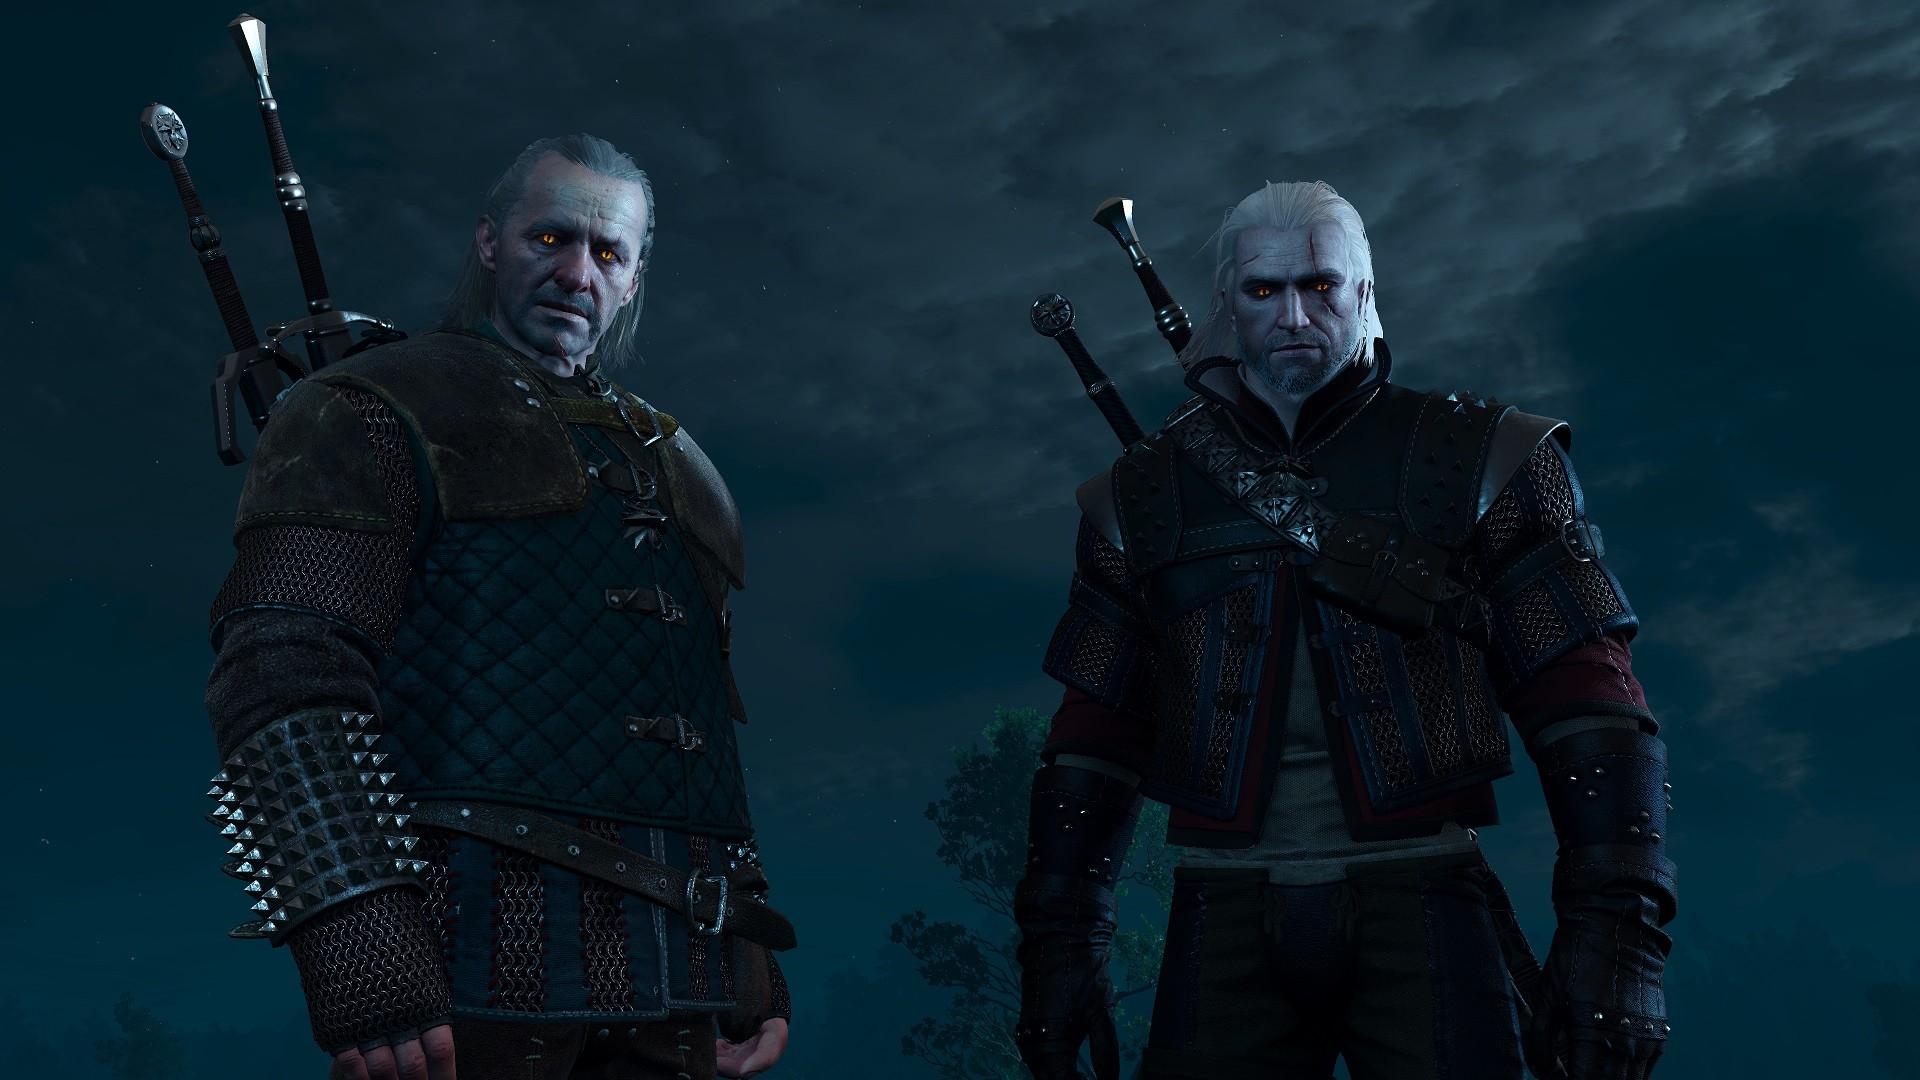 Glowing Witcher Eyes.